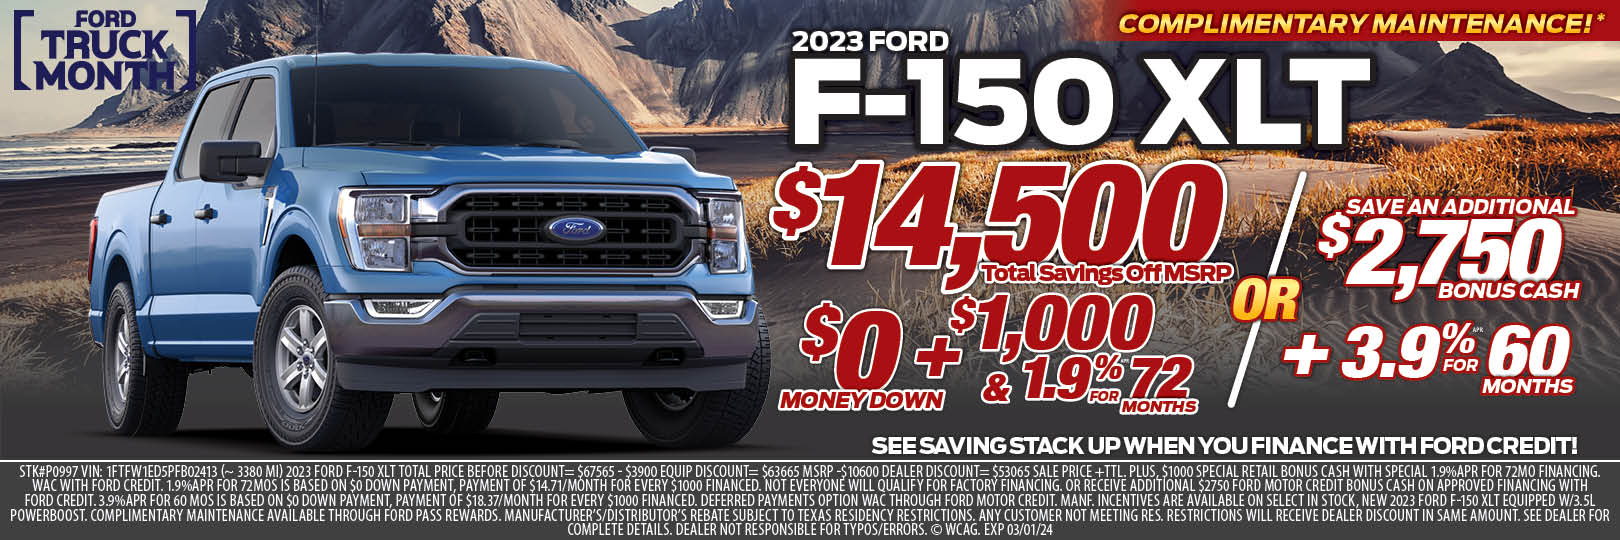 Ford Truck Month | F-150 Special | Houston Spring The Woodlands